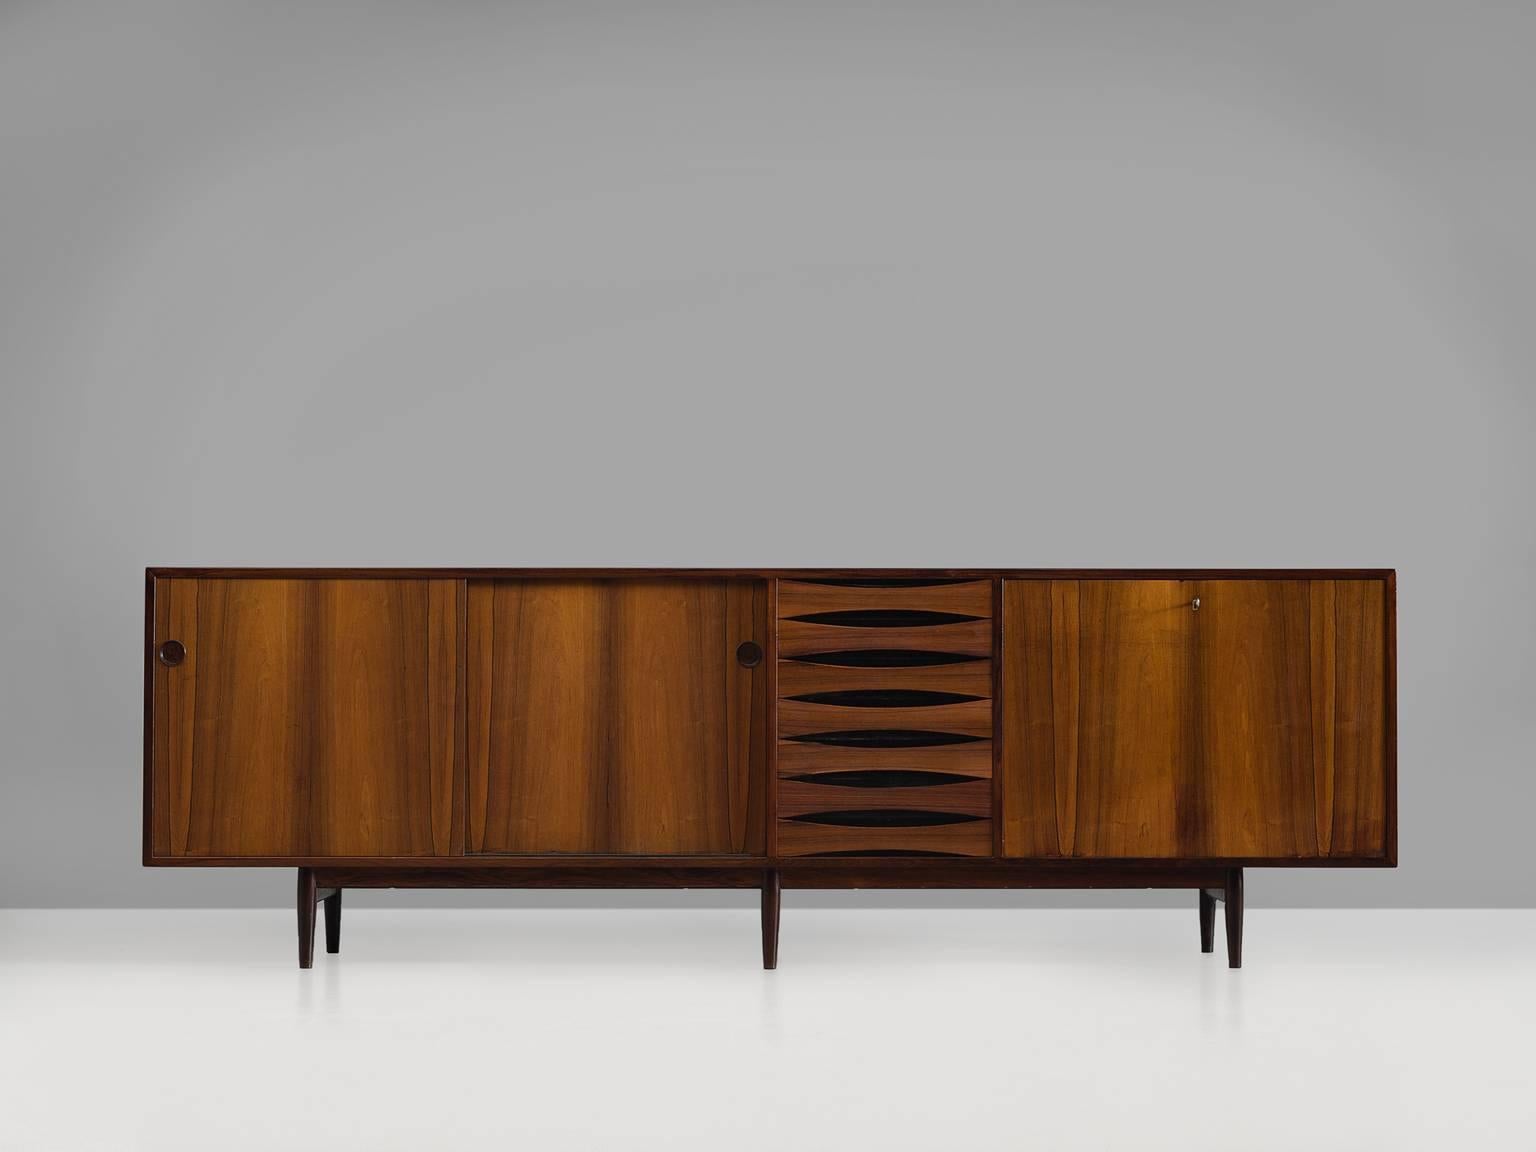 Credenza model 29A, in rosewood by Arne Vodder for P. Olsen Sibast Møbler, Denmark, 1959.

Iconic sideboard in rosewood by Danish designer Arne Vodder. The typical refined Vodder details can be found on this sideboard, for example, the